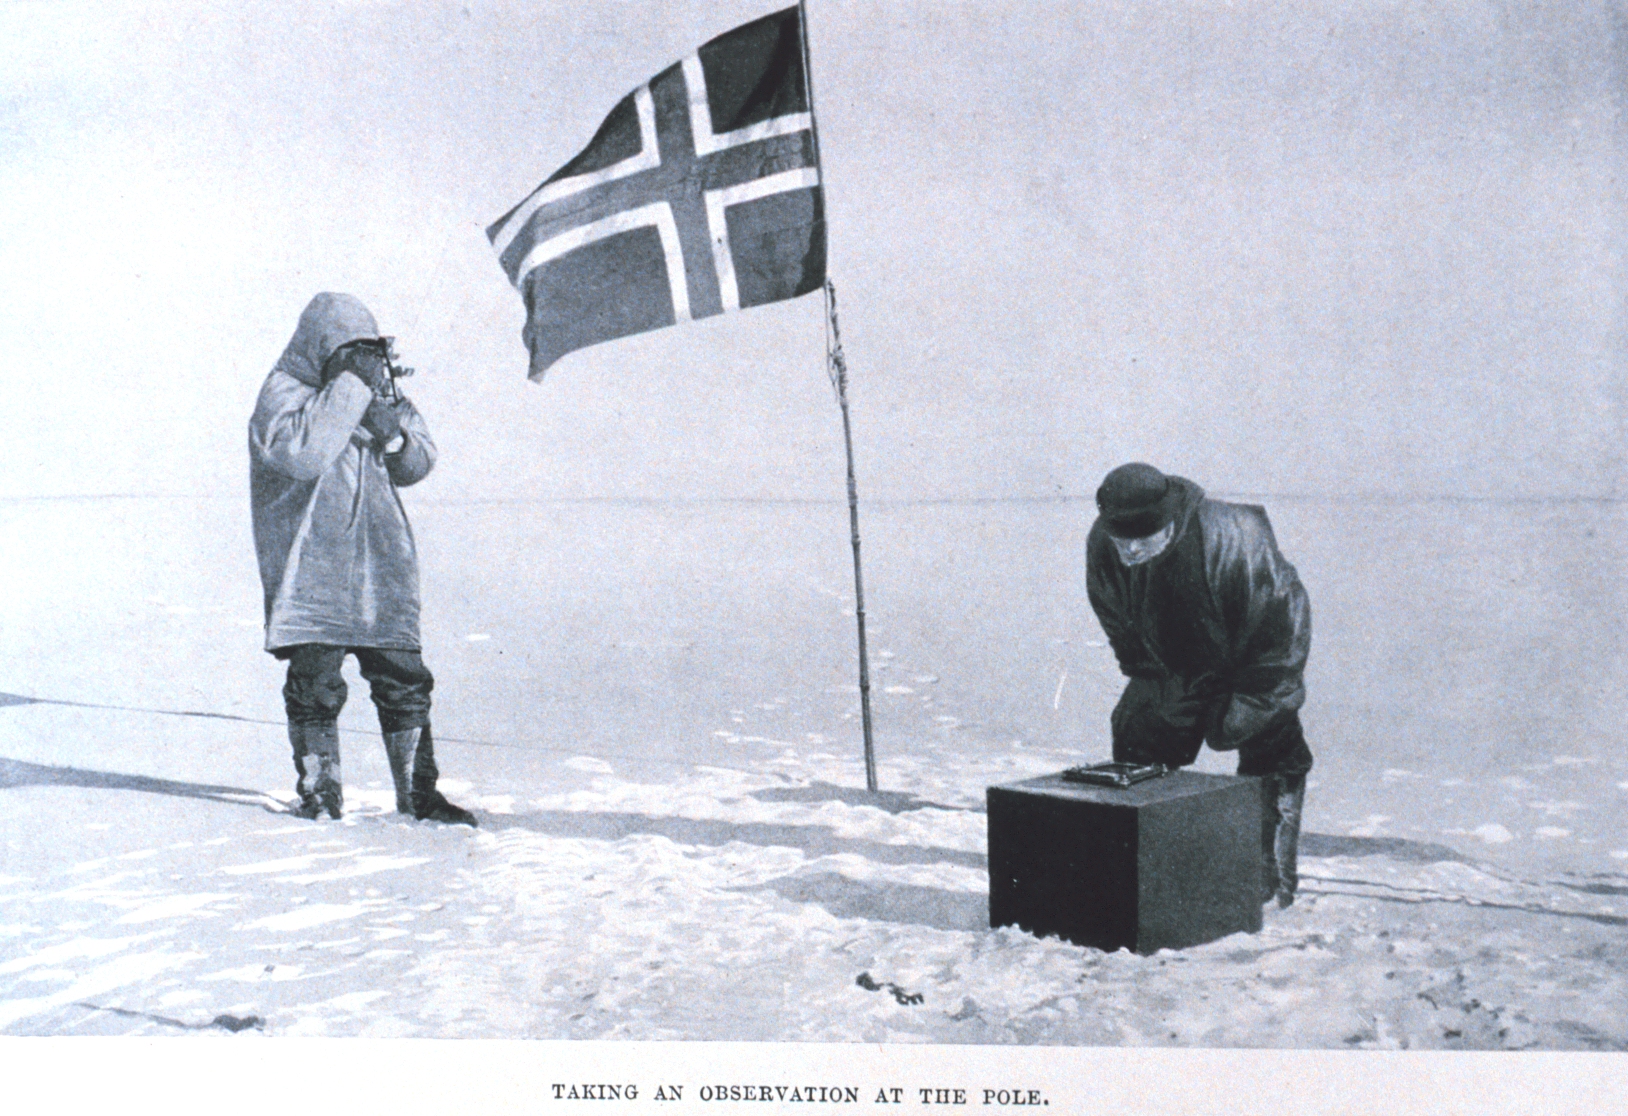 This photo, “Taking an observation at the pole,” shows the Norwegian team taking measurements at the South Pole. It appeared in Roald Amundsen’s book, “The South Pole.”   Credit: Roald Amundsen; public domain.